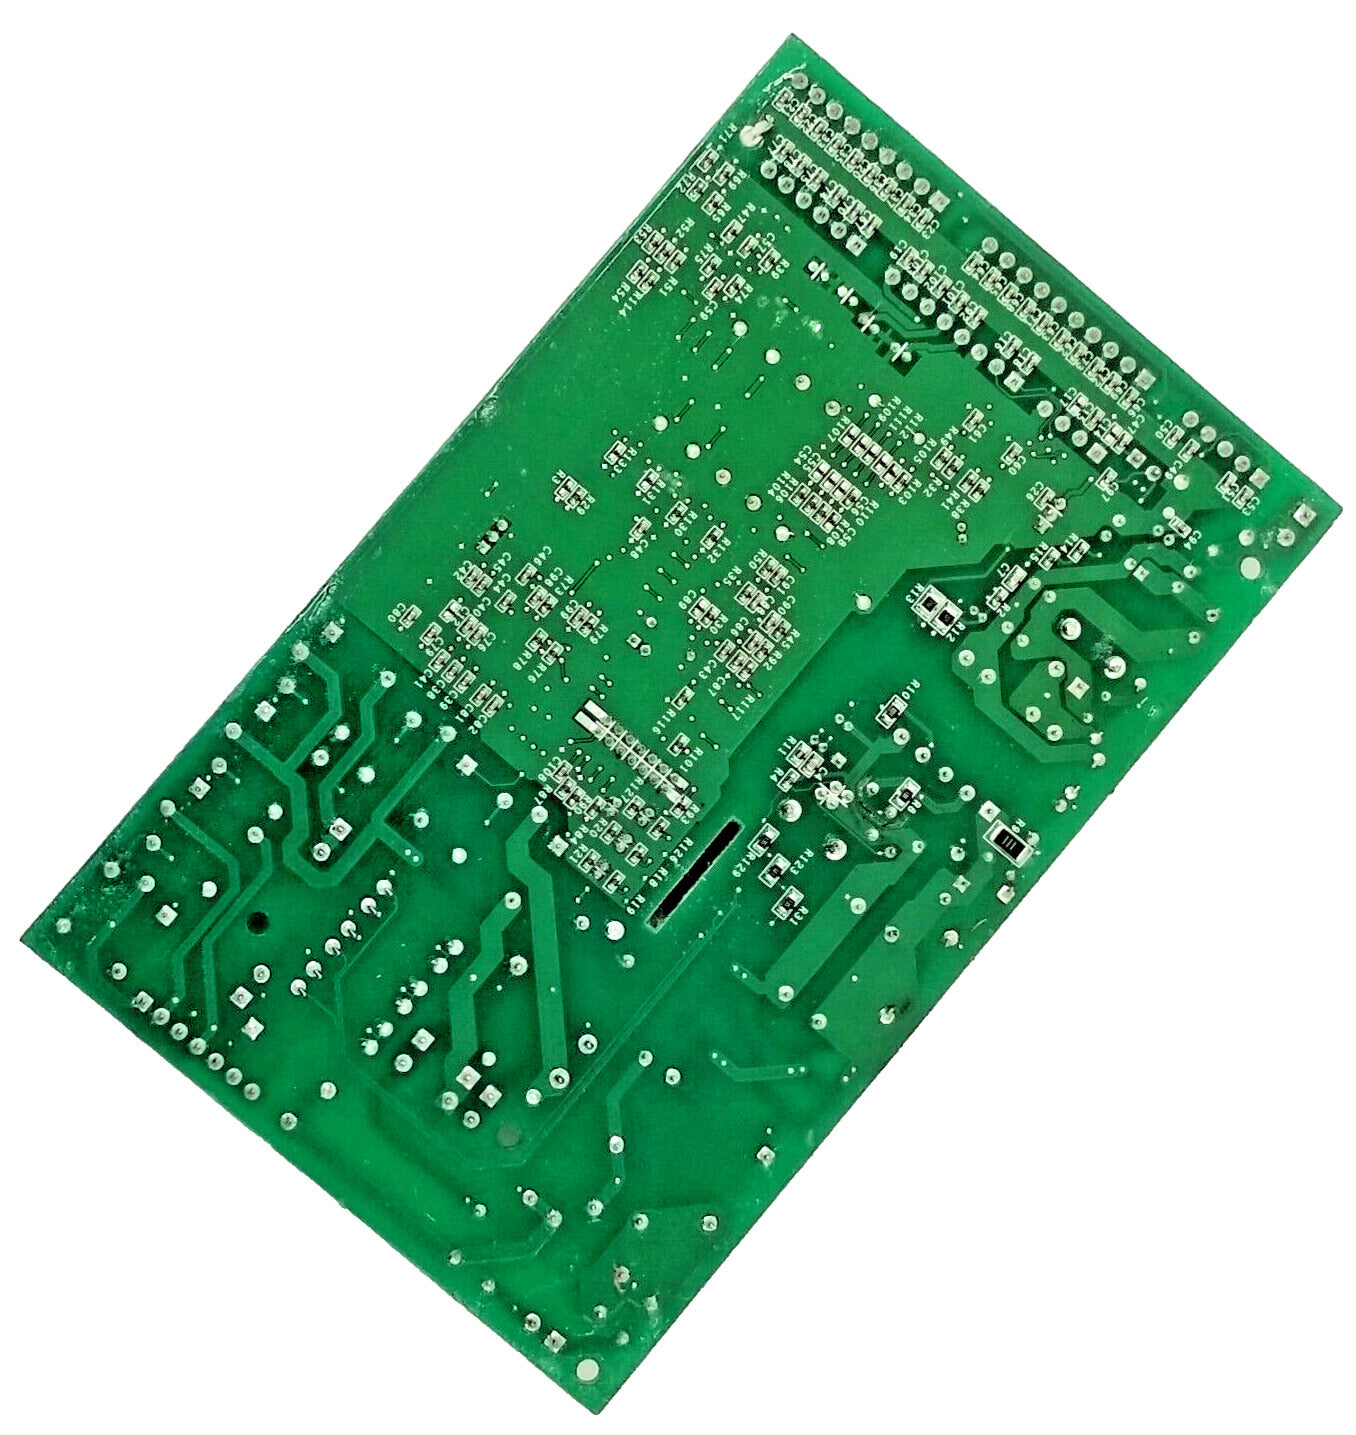 OEM Replacement for GE Fridge Control 225D4208G003